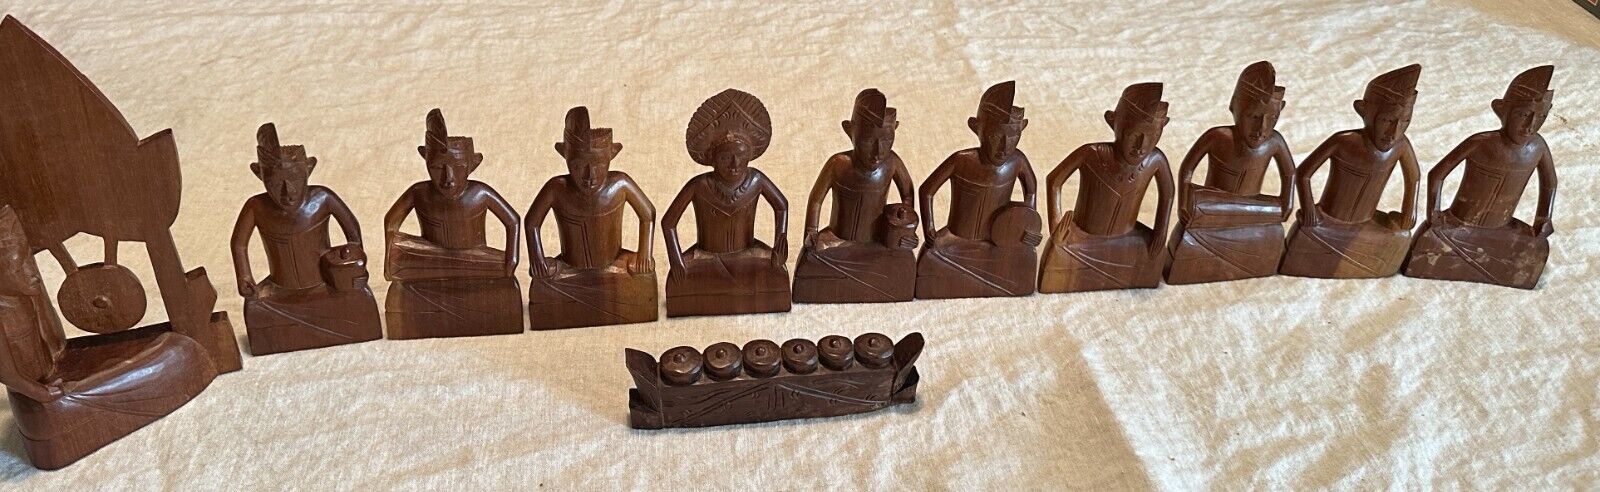 Lot of 12 Small BALI Balinese Small Wood Carvings Musicians and Tribes Folk.